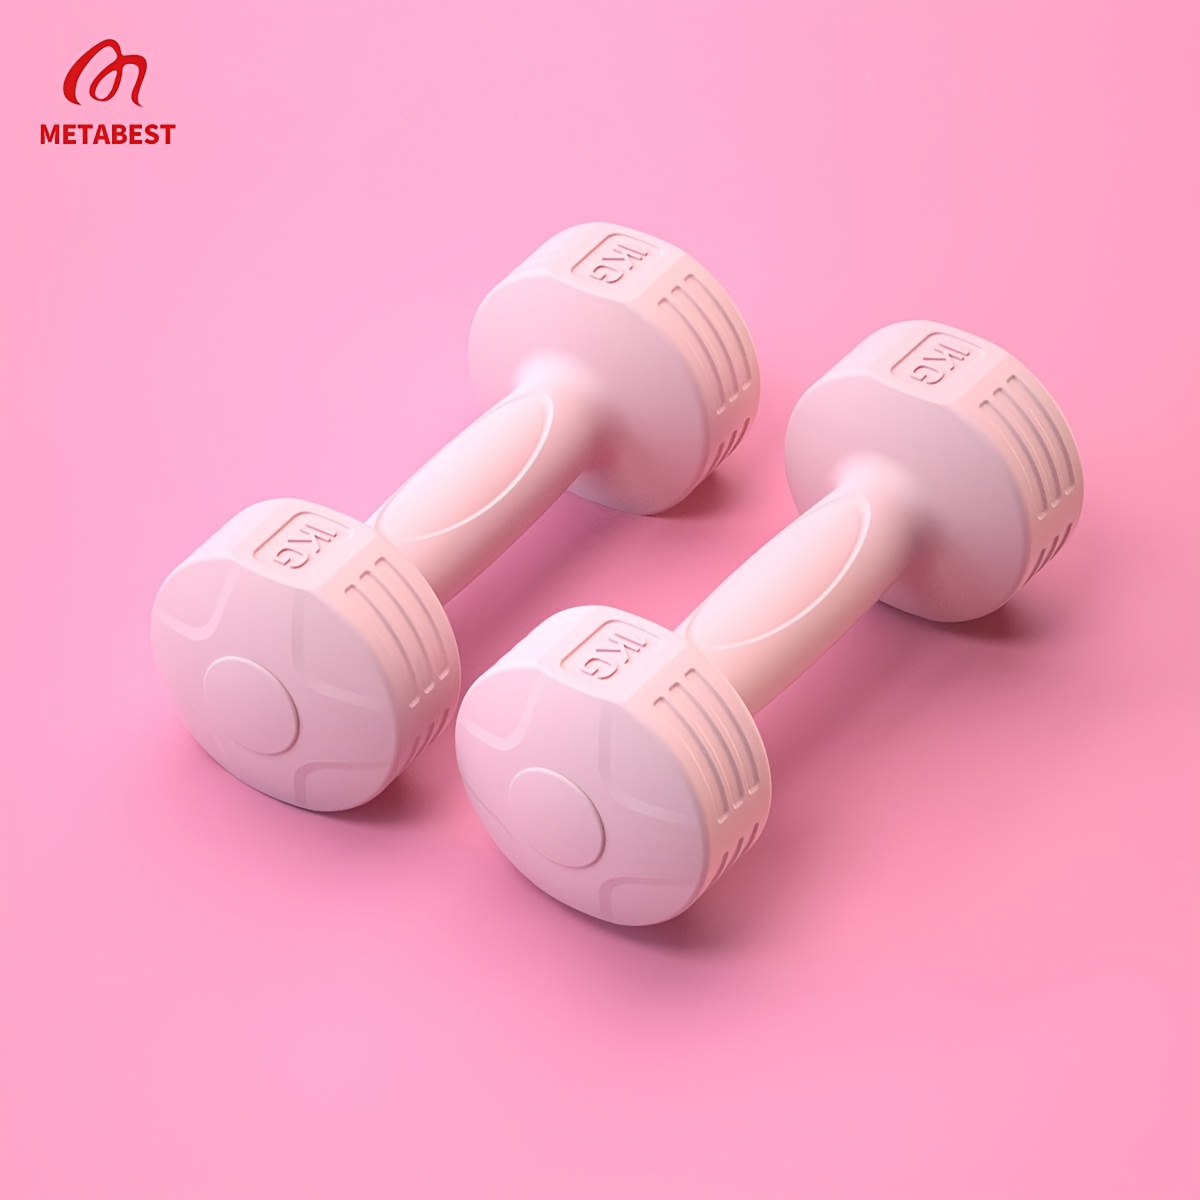 Sport, Working Out and Bodybuilding Concept with Girly Workout Equipment  Like a Pink Pair of Gym Gloves, Two Dumbbells or Weights Stock Image -  Image of concept, healthy: 192103685